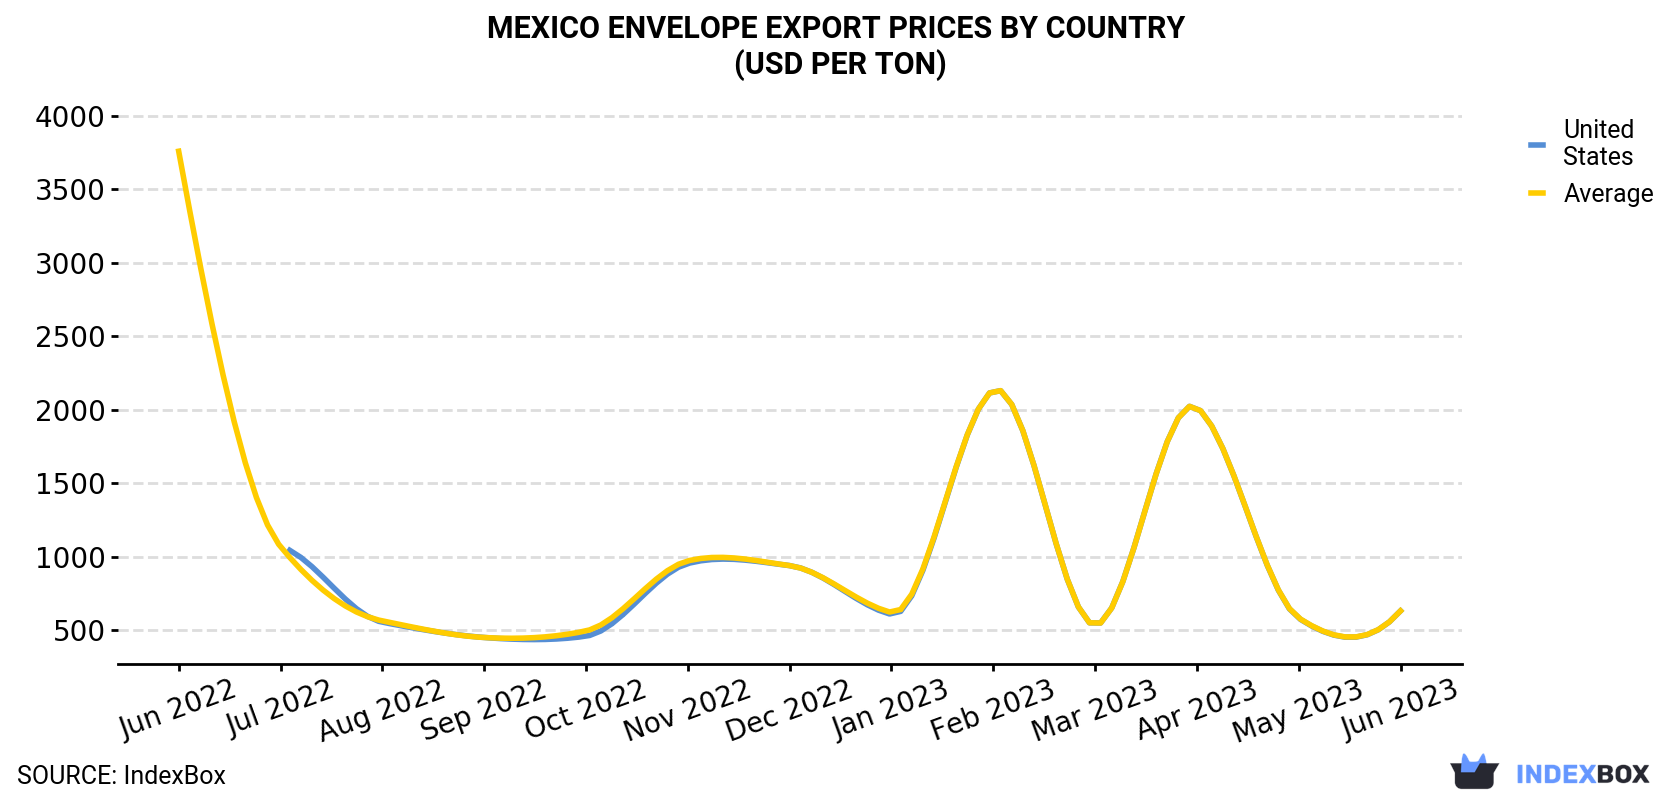 Mexico Envelope Export Prices By Country (USD Per Ton)